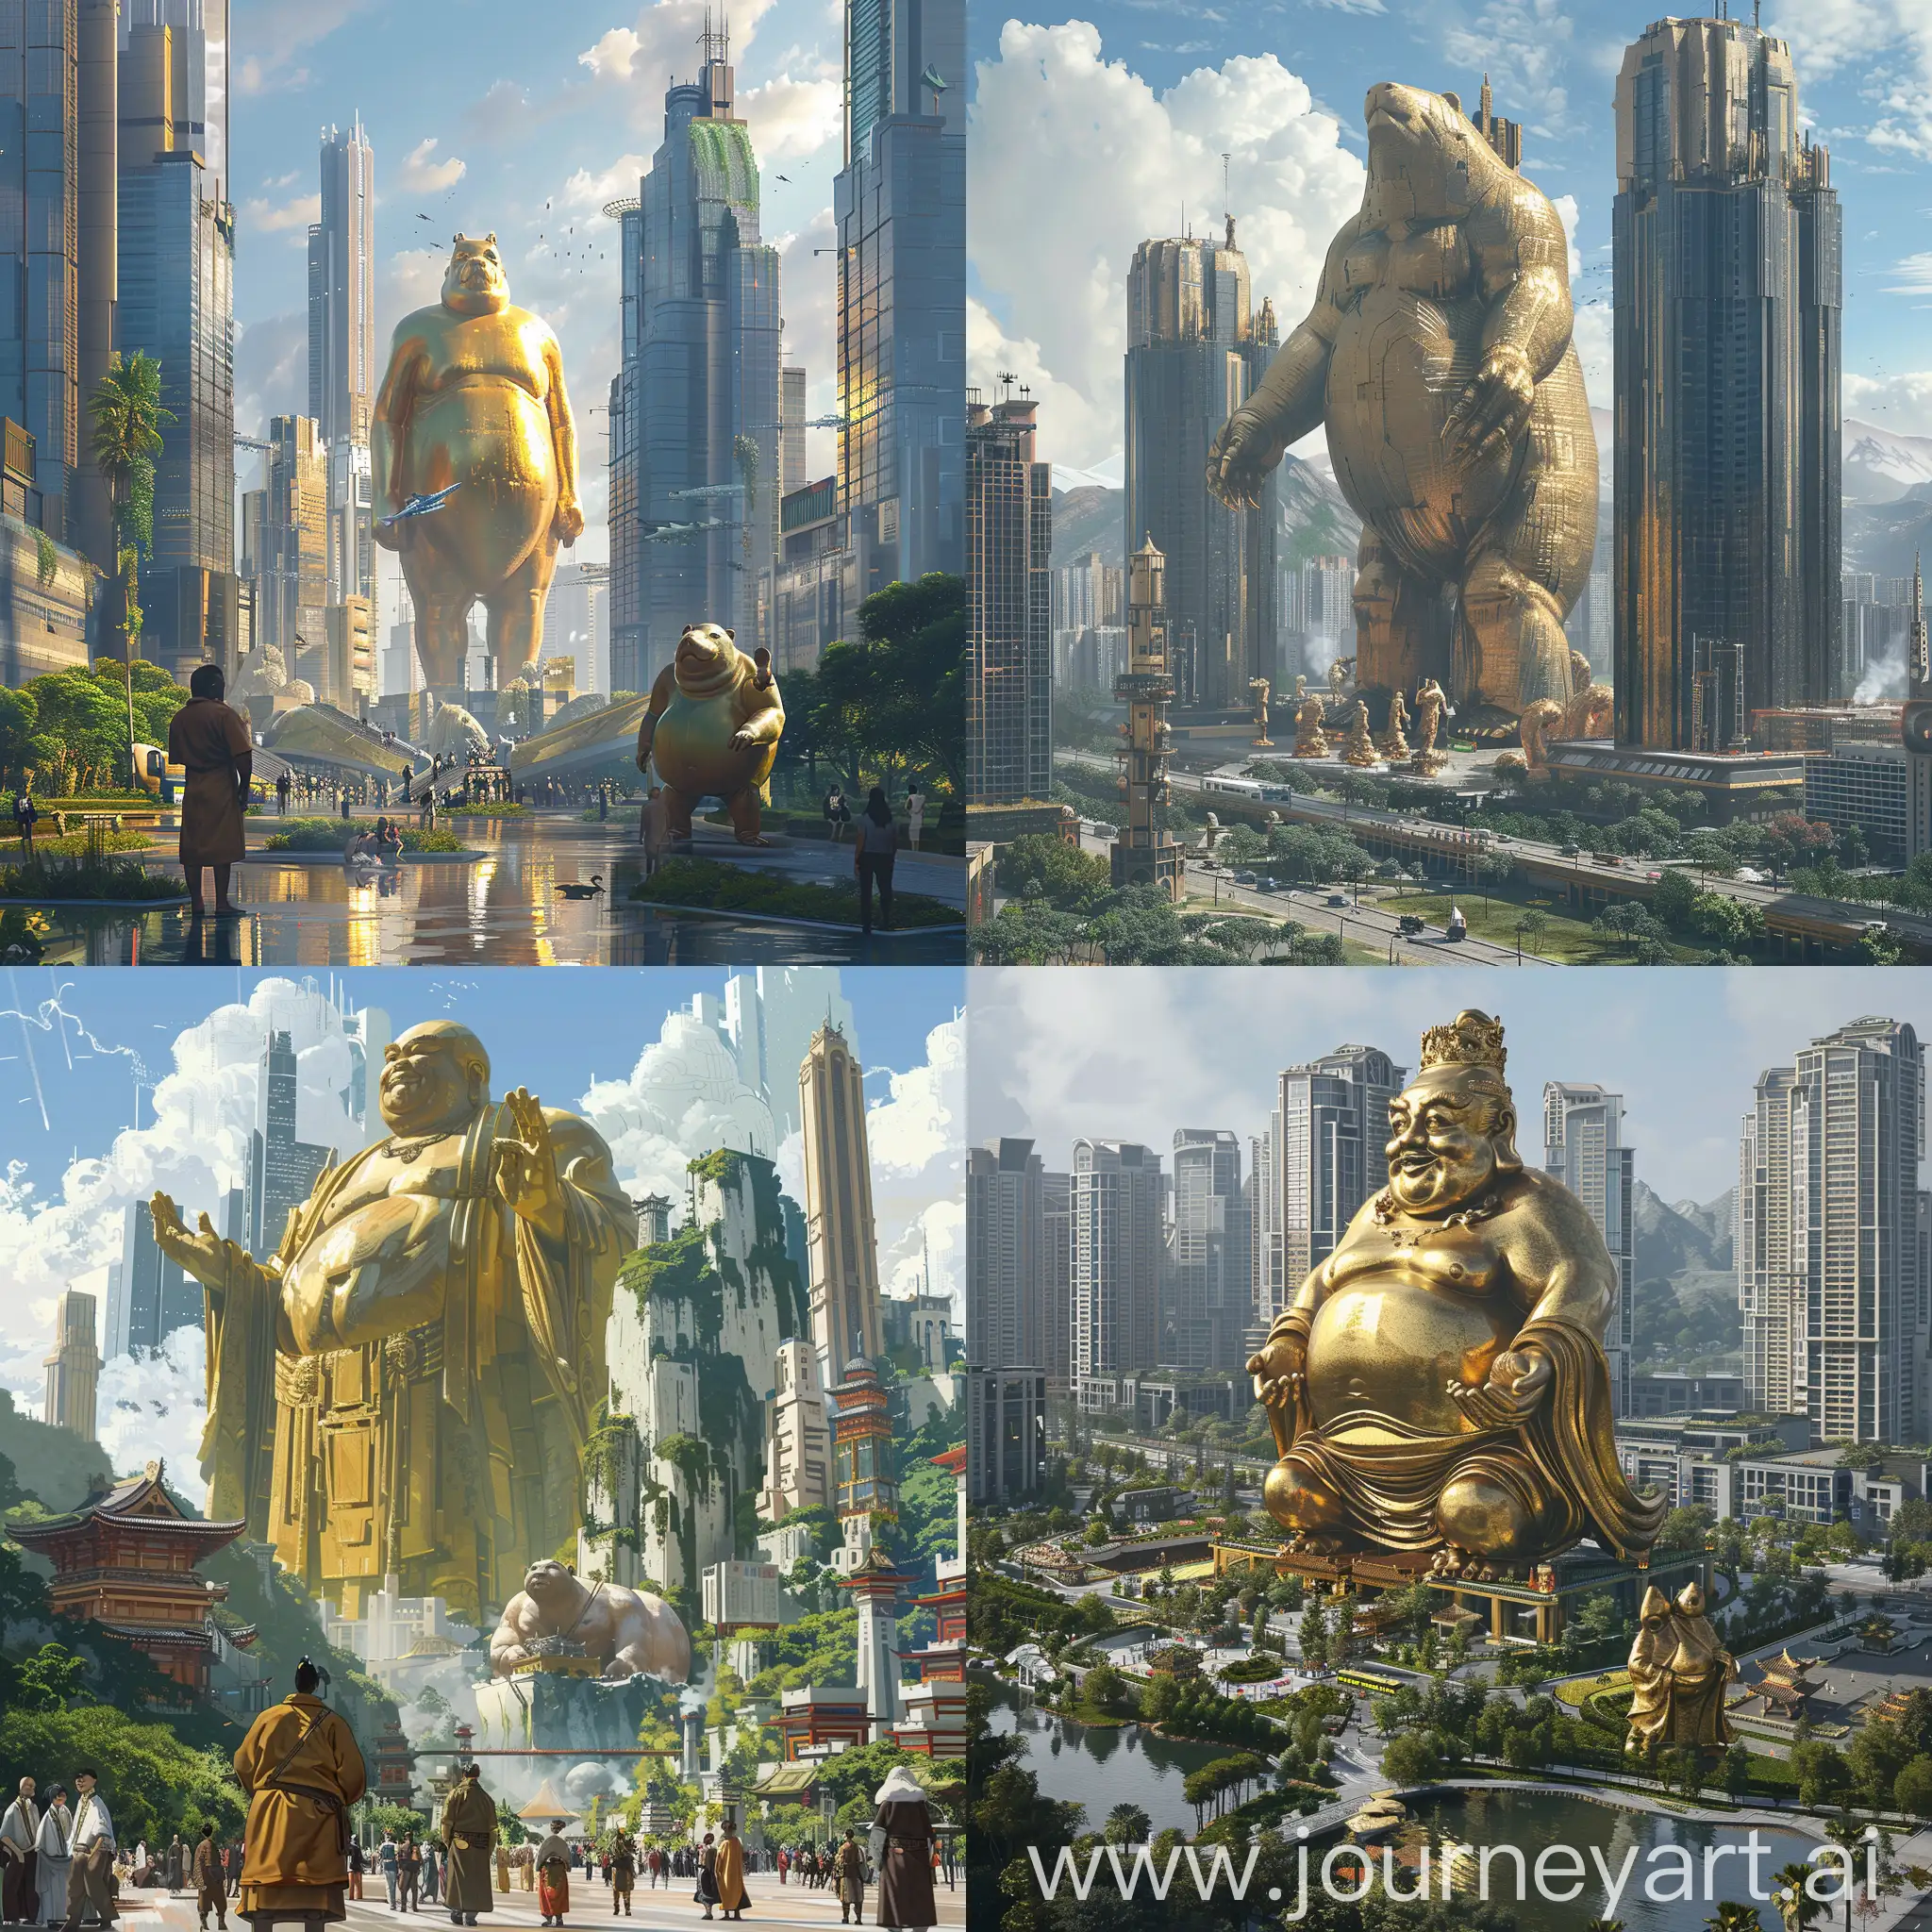 A huge modern city, where in the middle there is a huge statue of Bo Sinn cast in gold, to the right of it there is an equally large statue of a fat man holding a capybara.